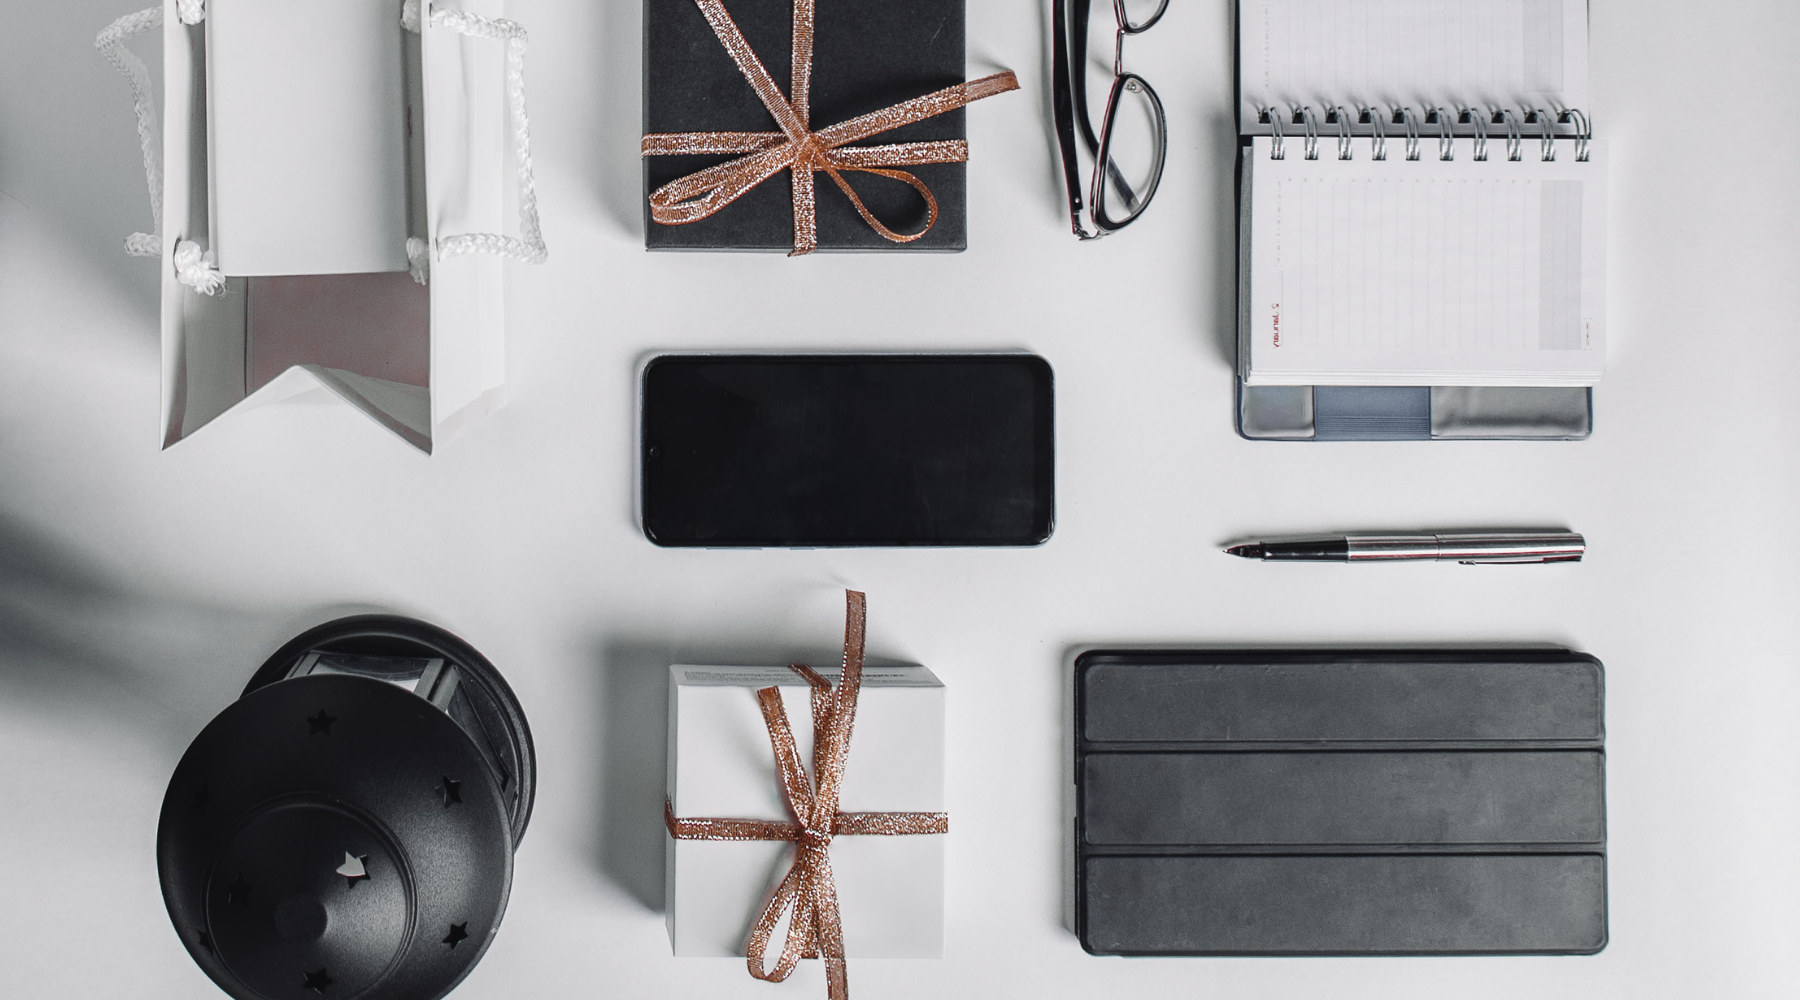 Top view of a minimalist desk setup with gift bags, a notebook, and modern gadgets.